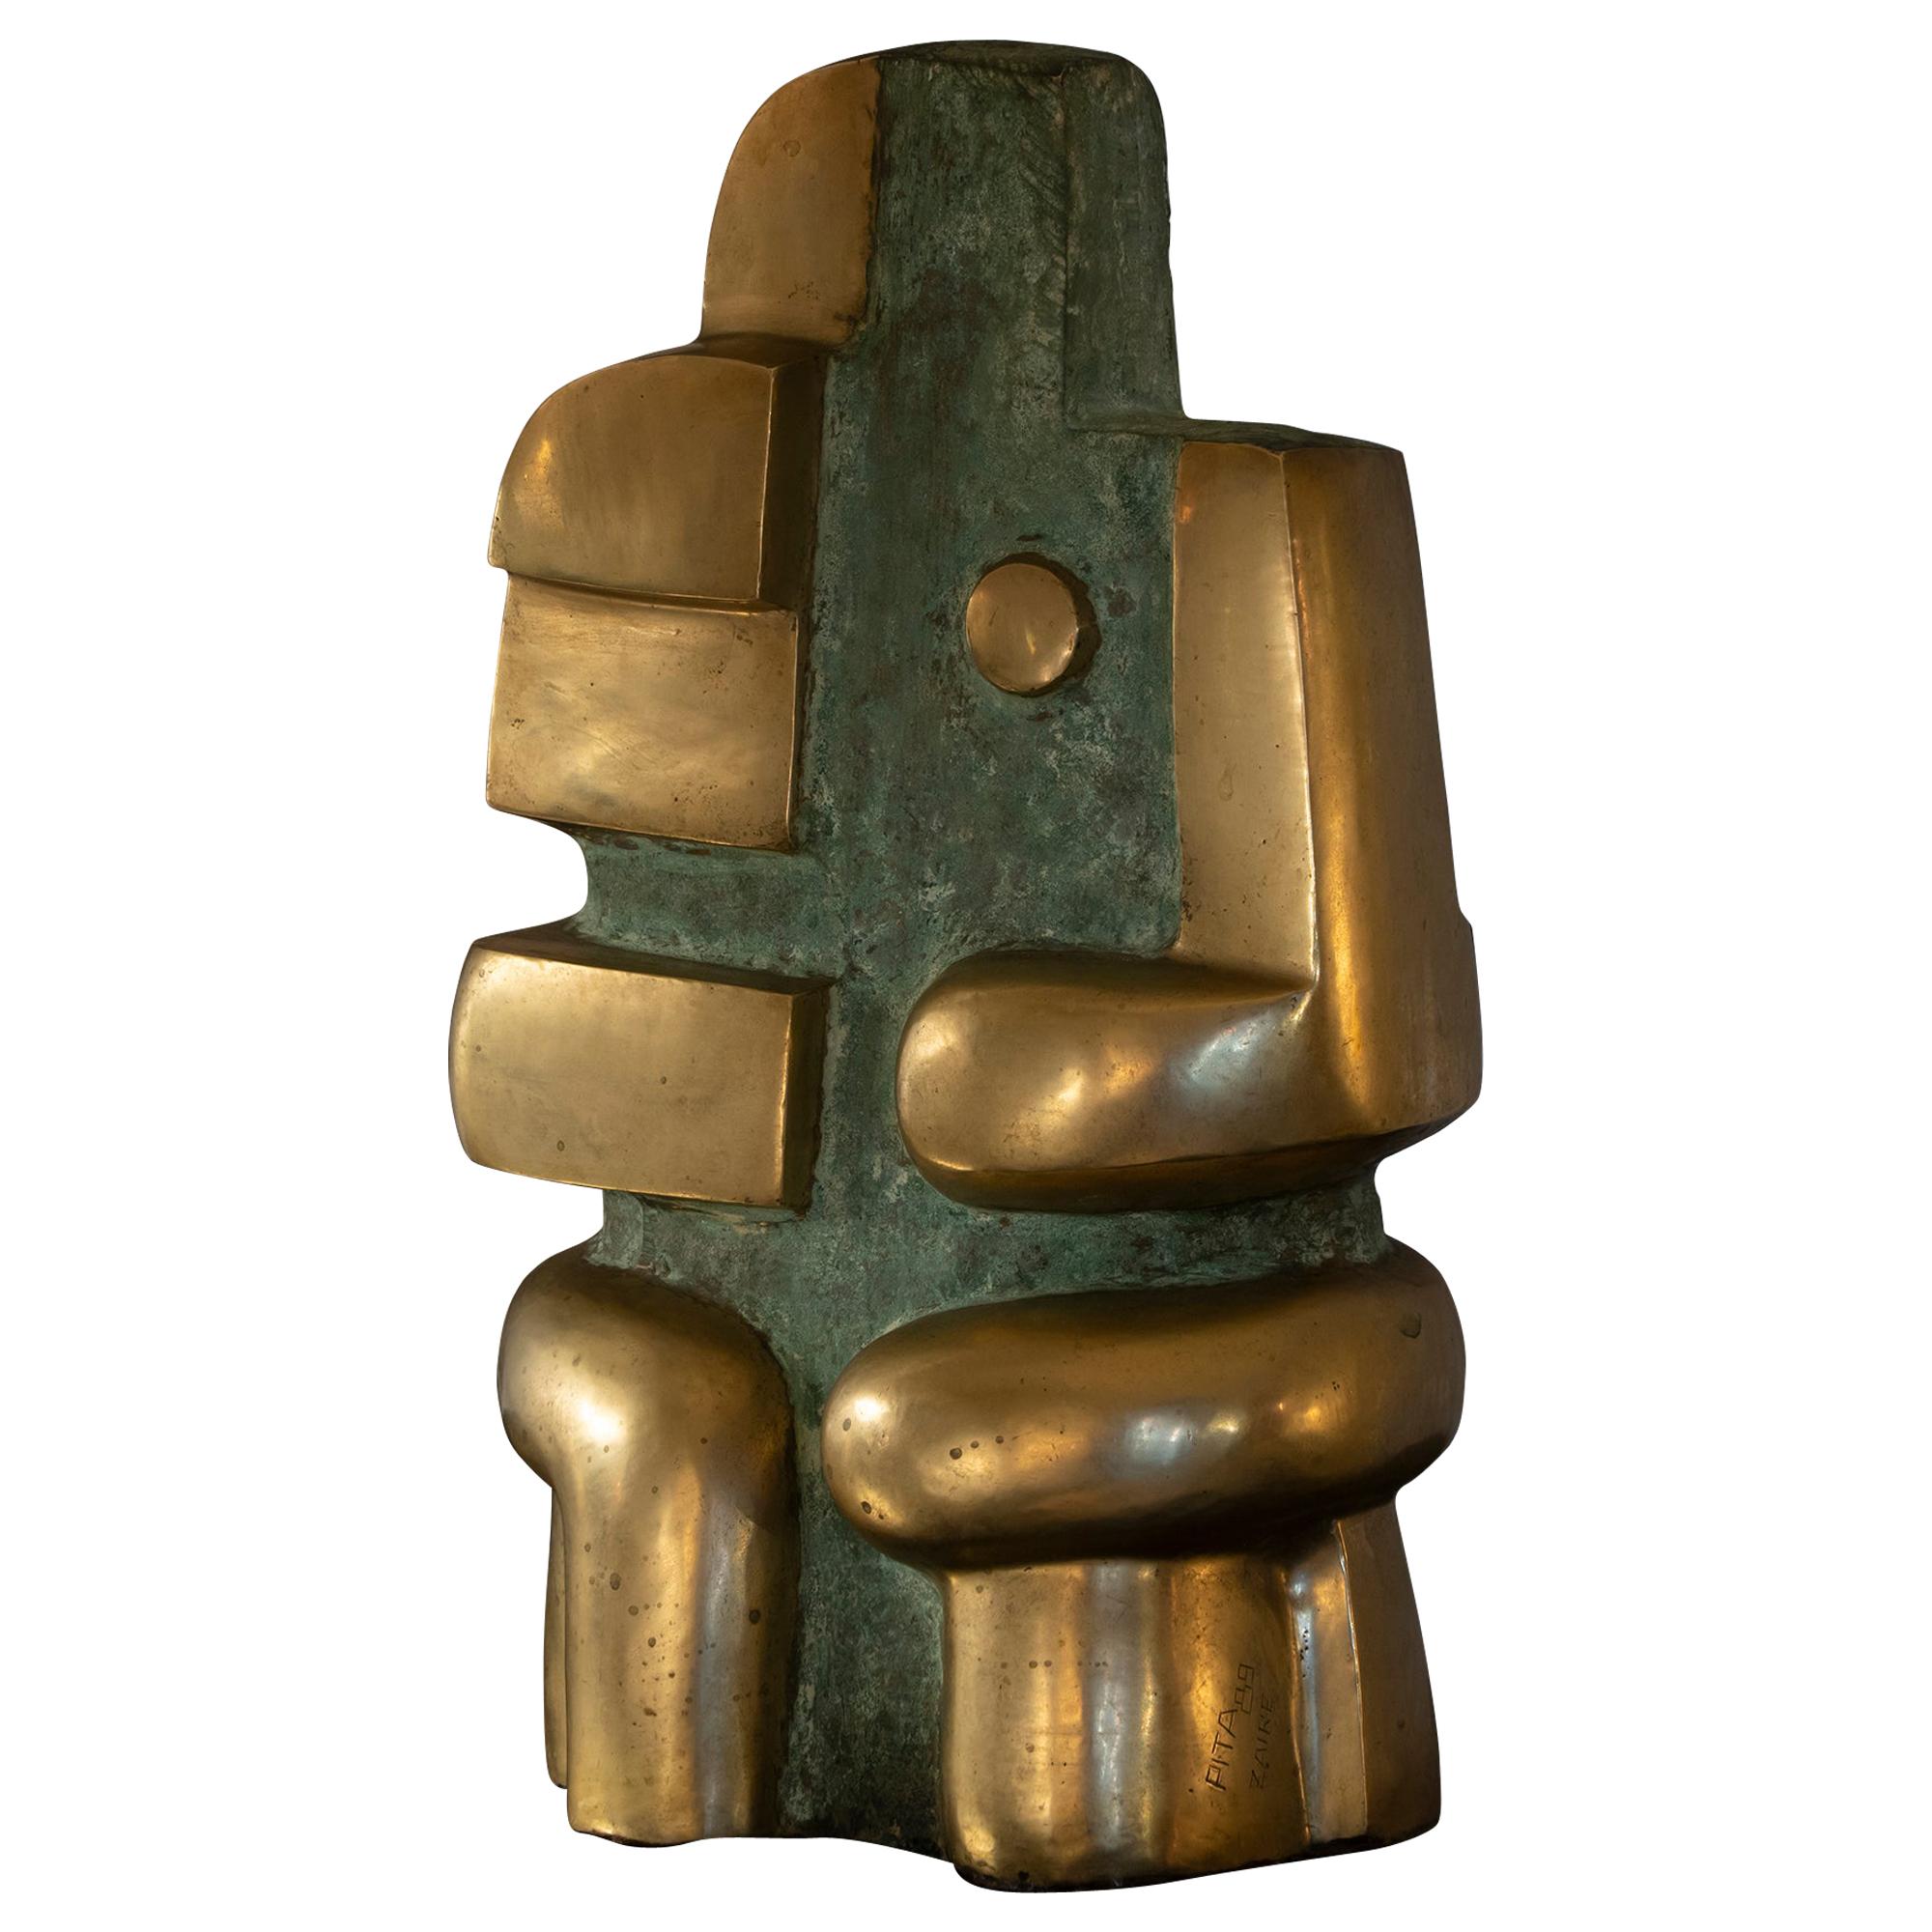 Polished Bronze Abstract Sculpture, Signed and Dated Pita Zaire 89